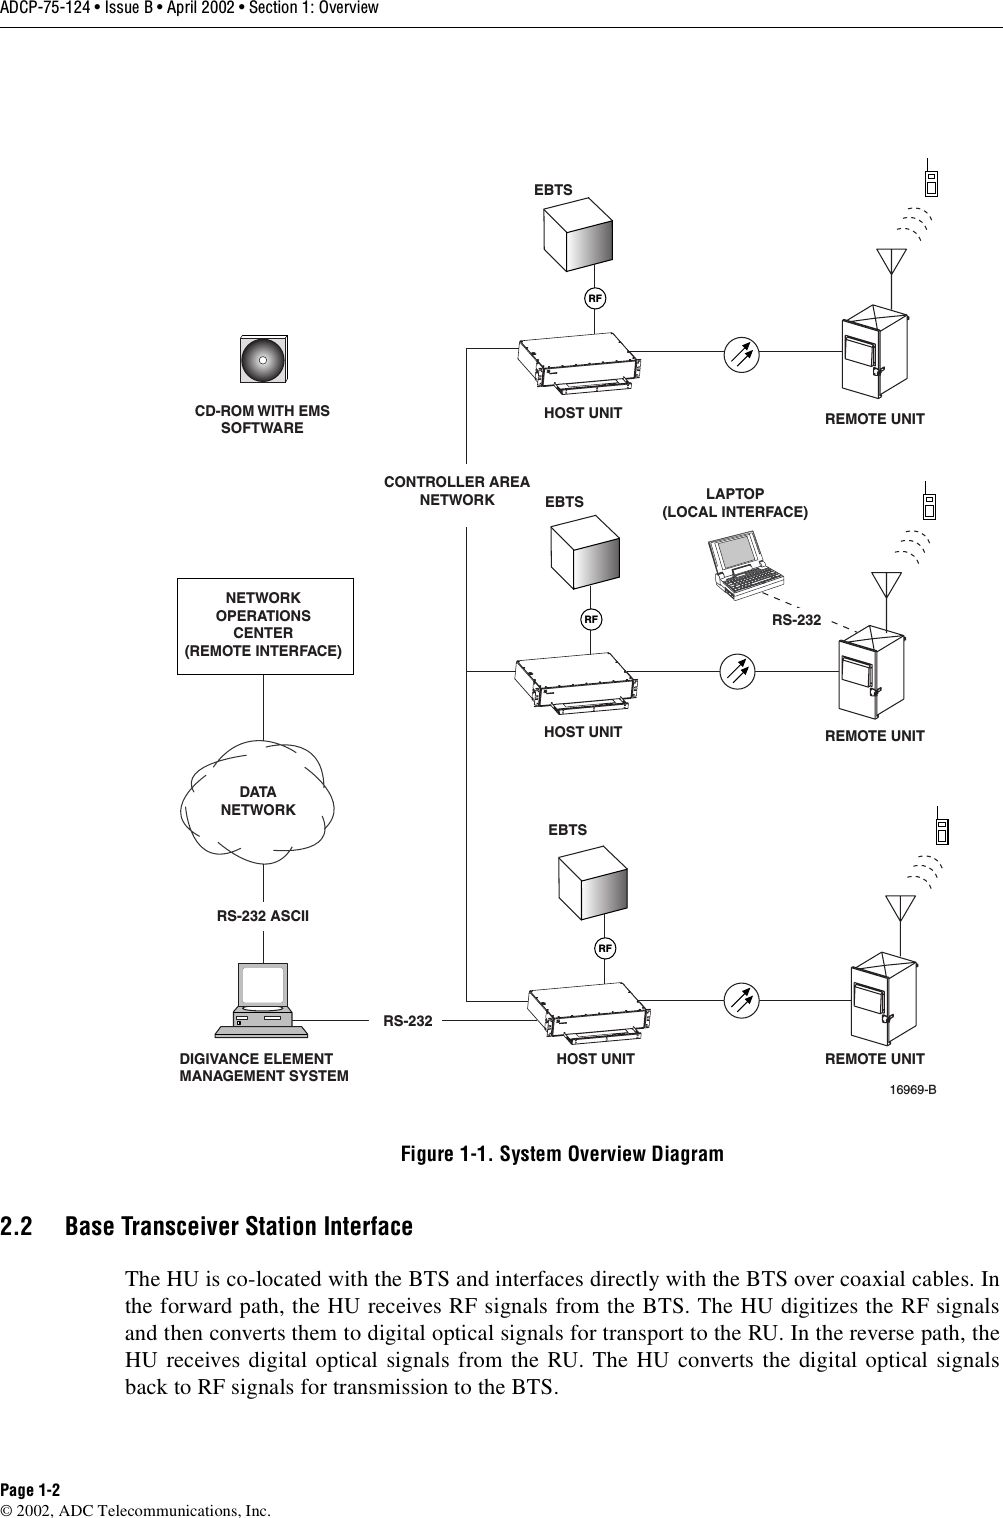 ADCP-75-124 • Issue B • April 2002 • Section 1: OverviewPage 1-2©2002, ADC Telecommunications, Inc.Figure 1-1. System Overview Diagram2.2 Base Transceiver Station InterfaceThe HU is co-located with the BTS and interfaces directly with the BTS over coaxial cables. Inthe forward path, the HU receives RF signals from the BTS. The HU digitizes the RF signalsand then converts them to digital optical signals for transport to the RU. In the reverse path, theHU receives digital optical signals from the RU. The HU converts the digital optical signalsback to RF signals for transmission to the BTS.EBTSEBTSEBTSDIGIVANCE ELEMENTMANAGEMENT SYSTEMRFRFRFHOST UNITHOST UNITHOST UNITREMOTE UNITREMOTE UNITREMOTE UNITNETWORKOPERATIONSCENTER(REMOTE INTERFACE)LAPTOP(LOCAL INTERFACE)DATANETWORKCONTROLLER AREANETWORKRS-232 ASCIIRS-232RS-23216969-BCD-ROM WITH EMSSOFTWARE